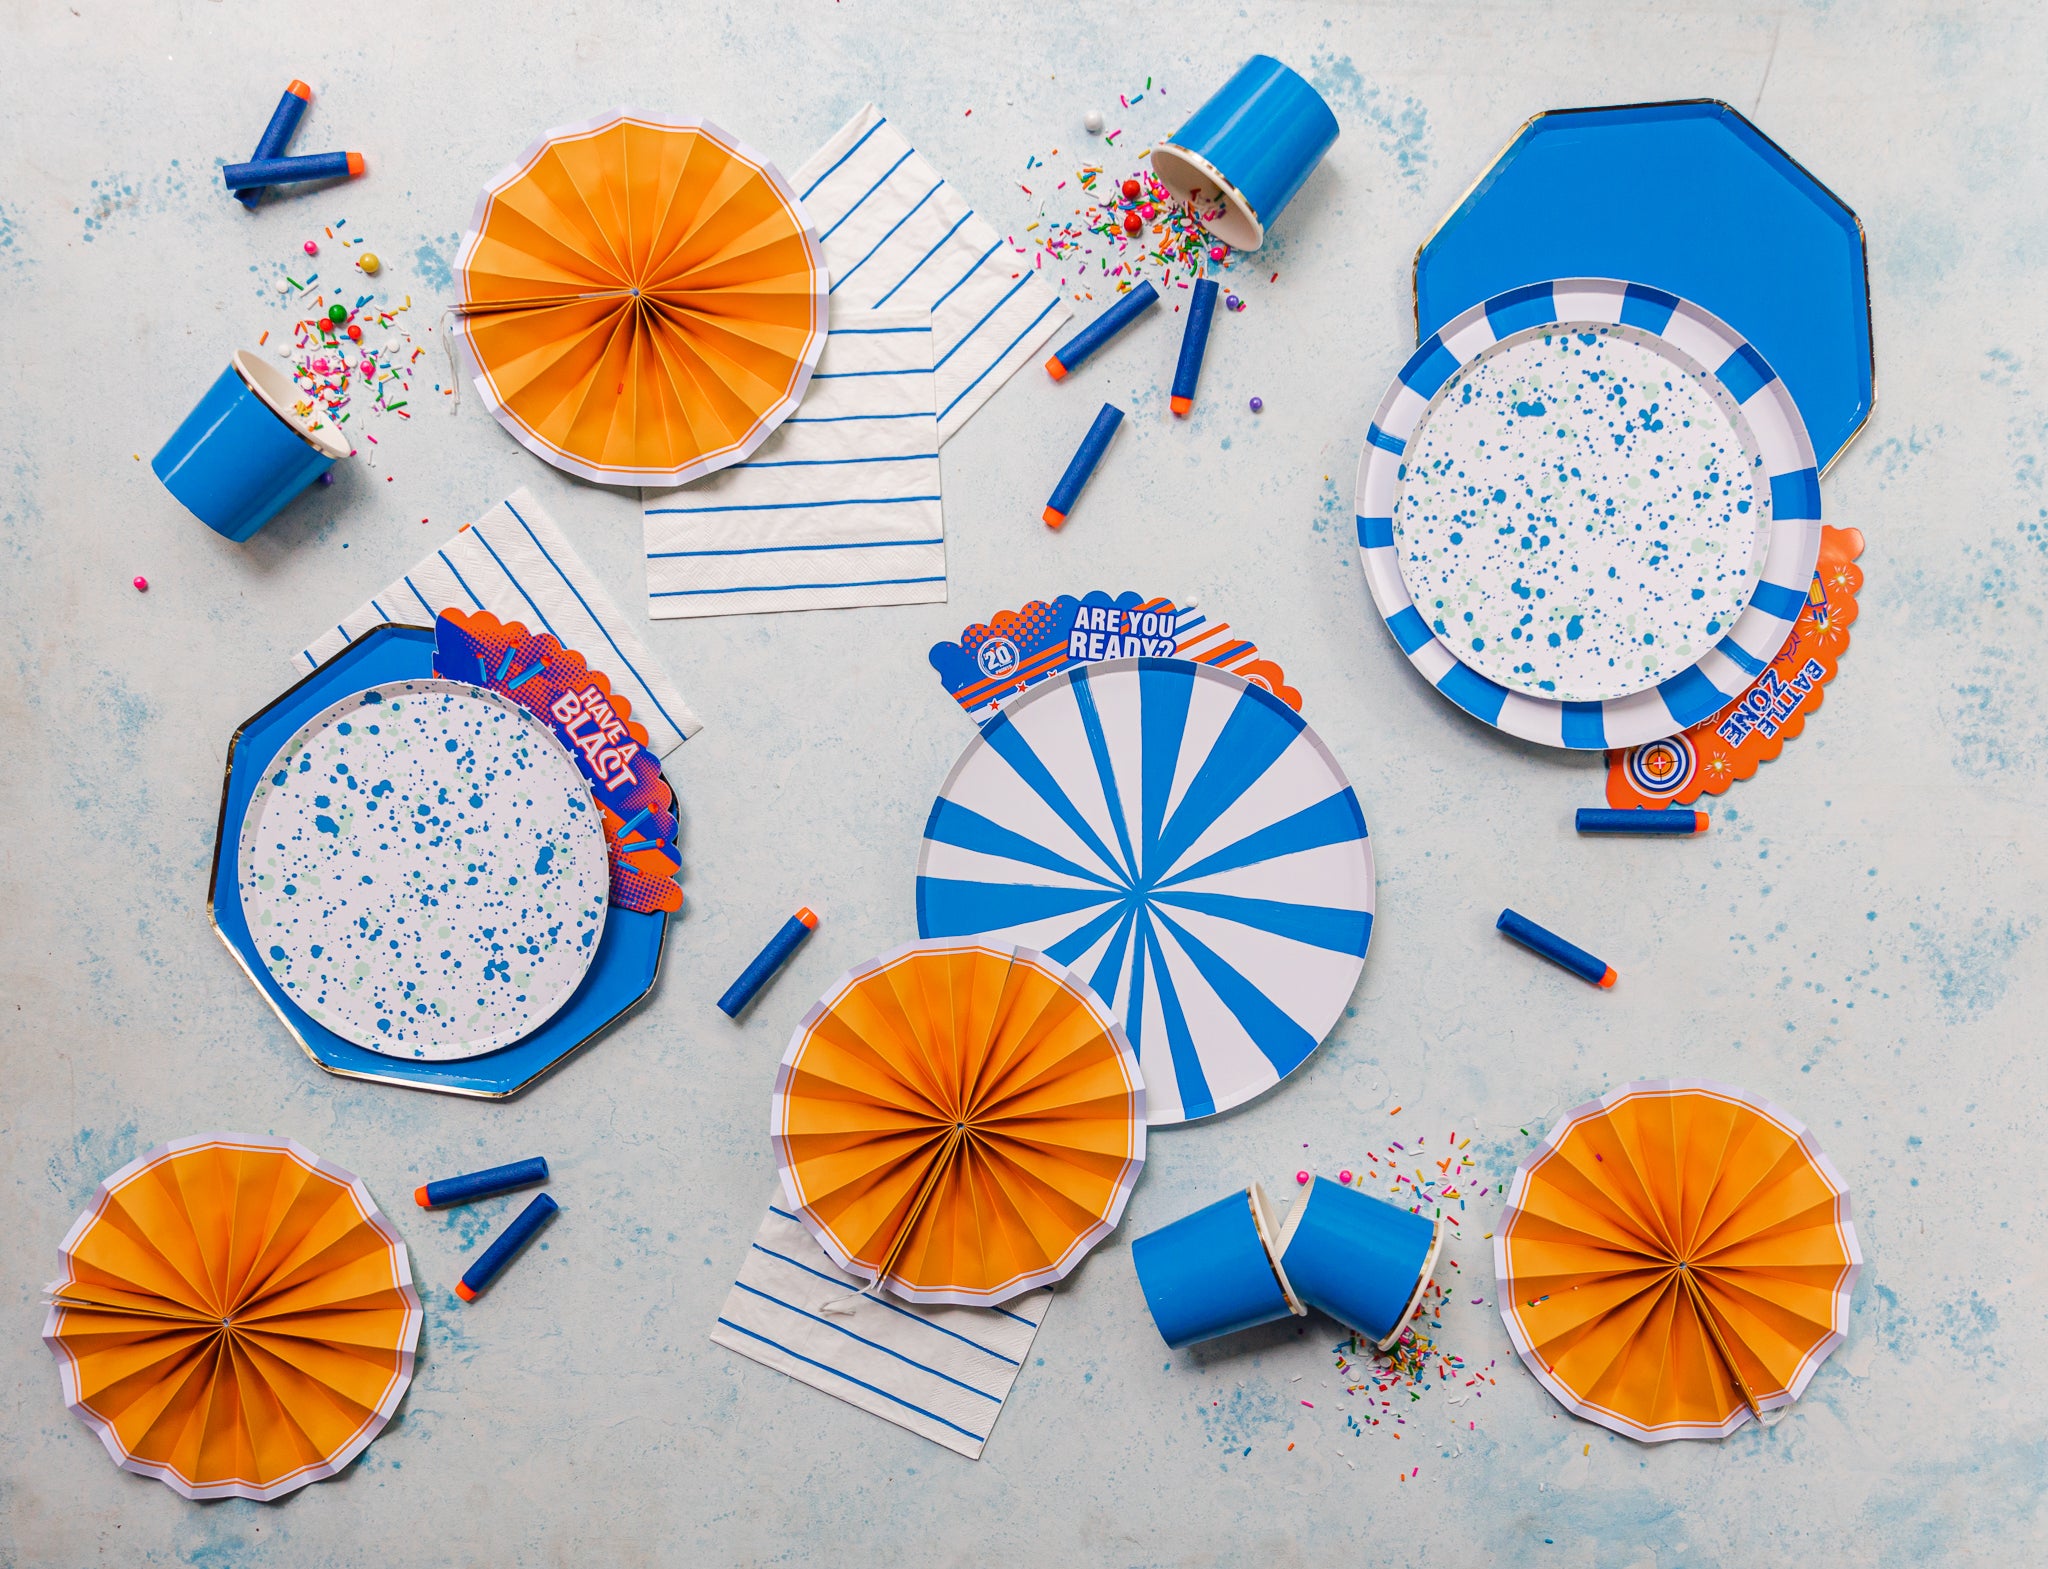 Blue and orange tableware for a Nerf-themed birthday party.